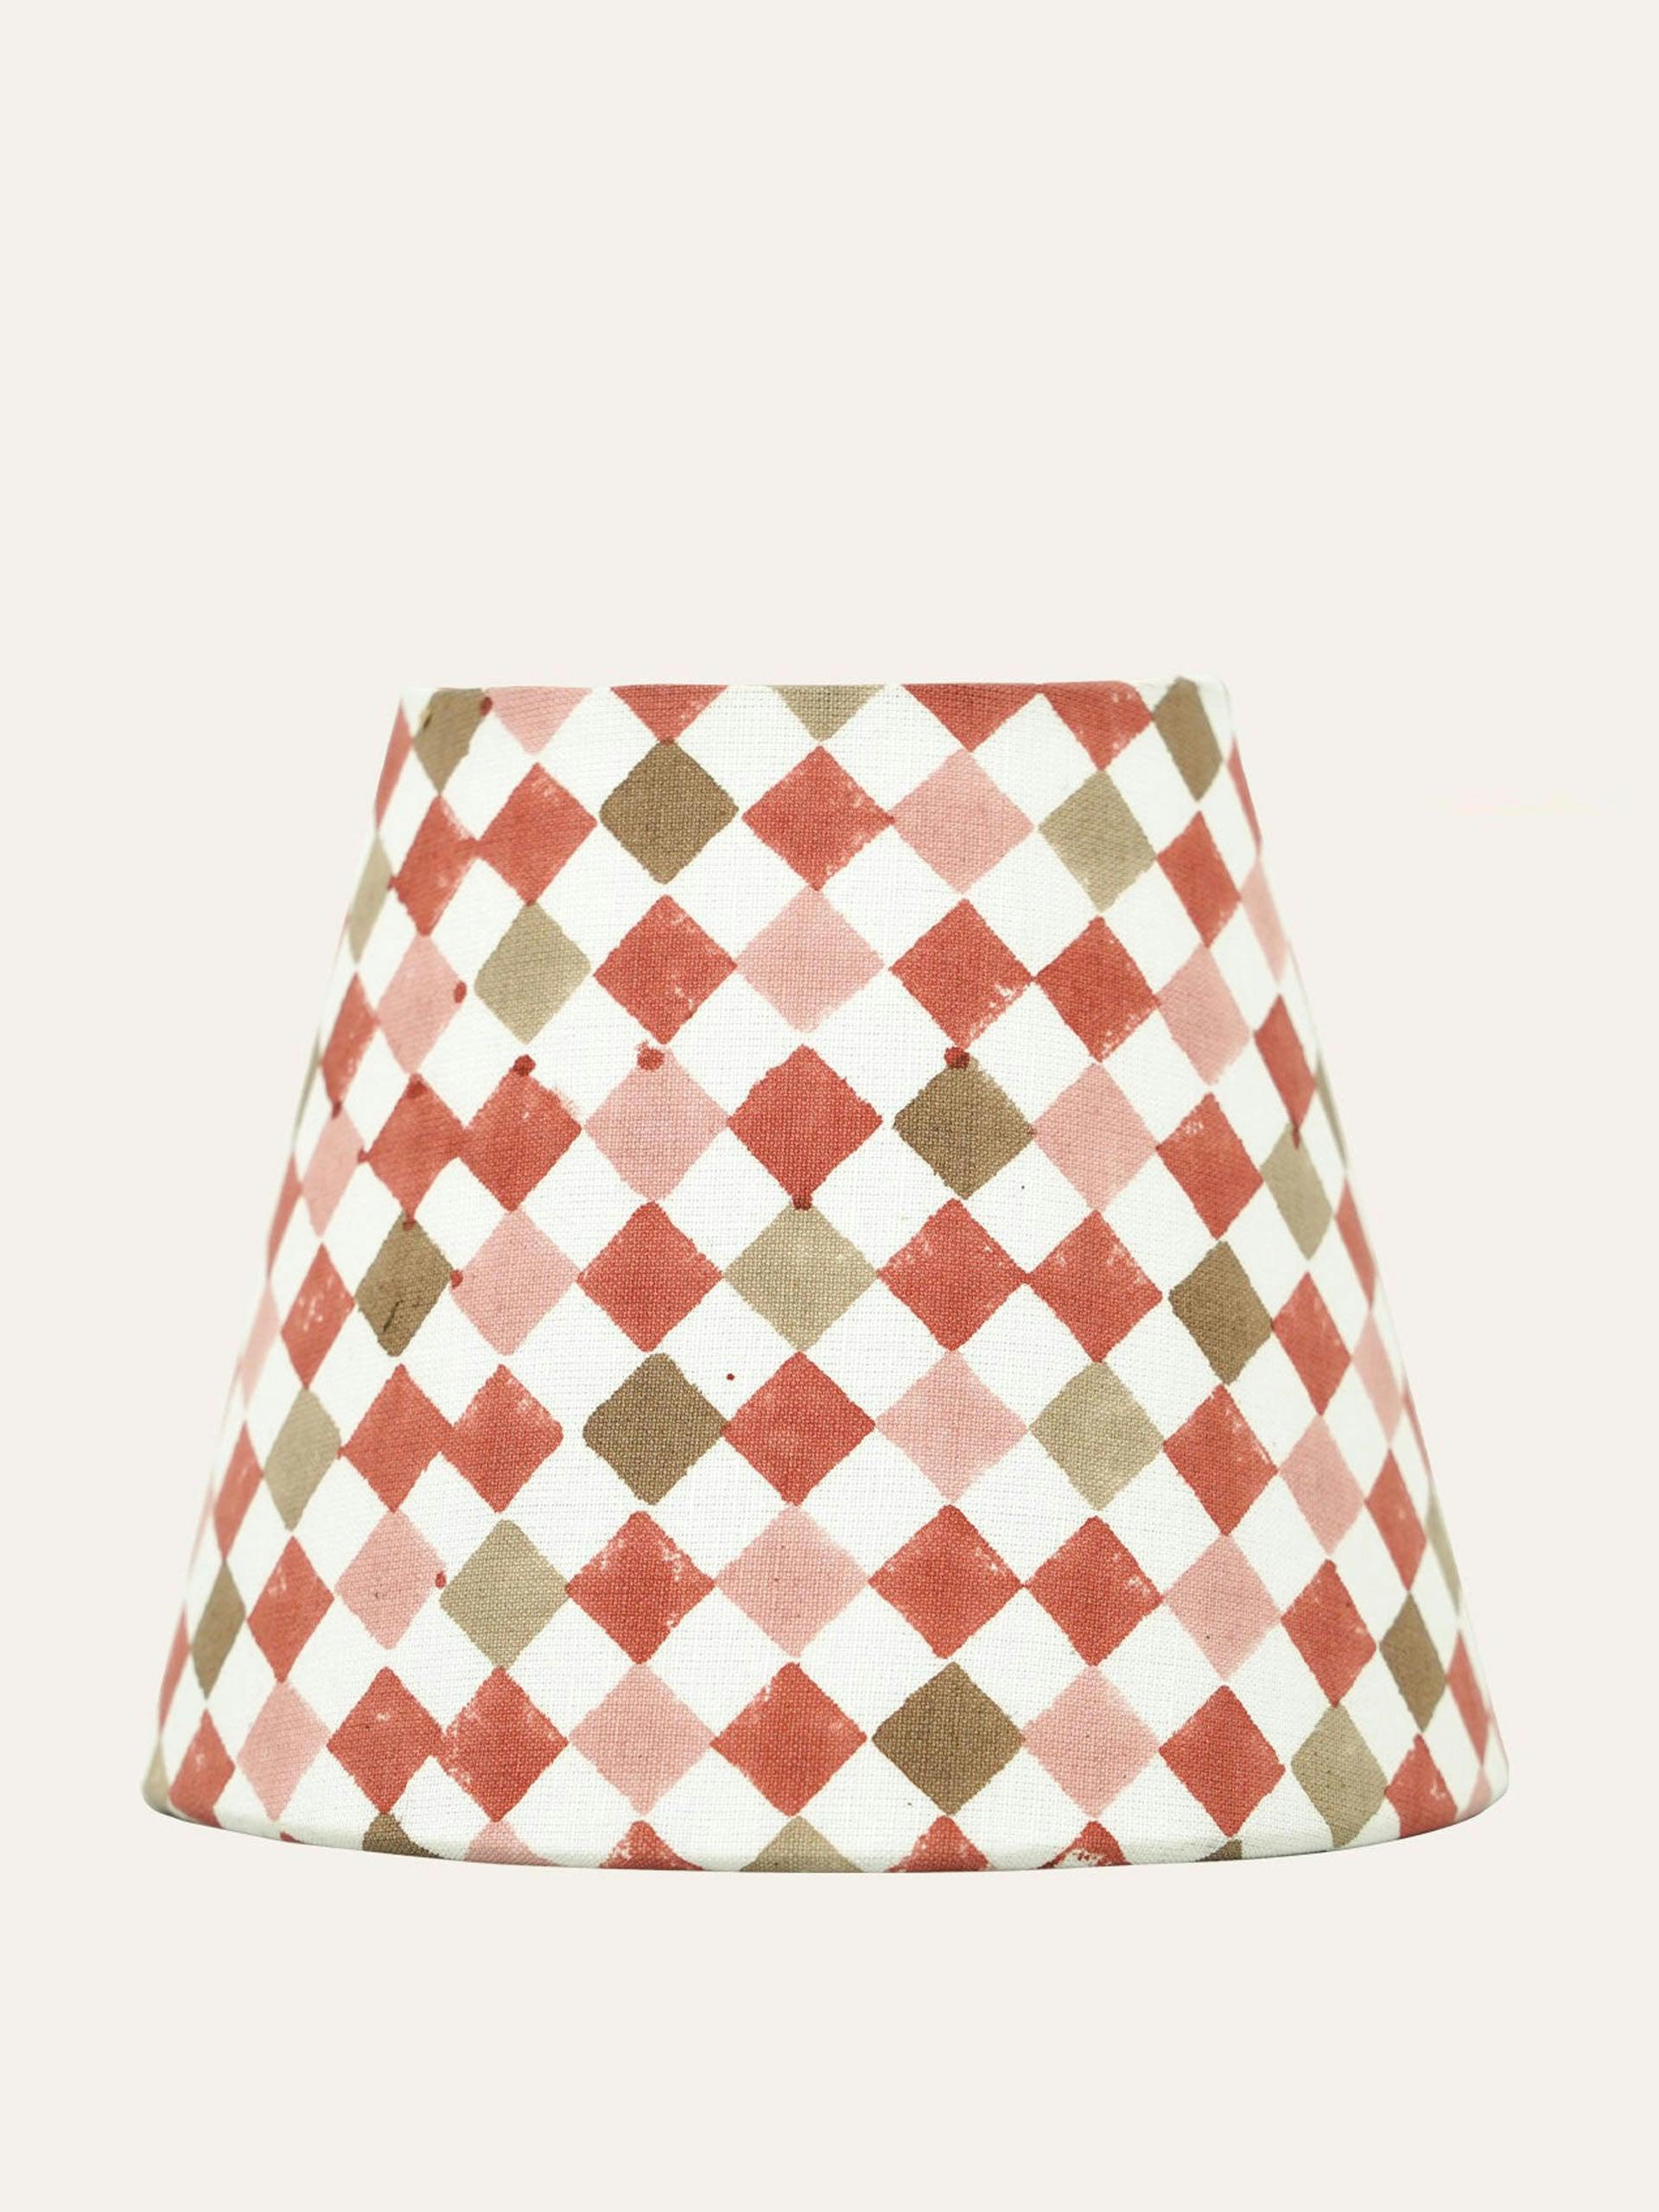 Red and Taupe Azulejo candle lampshade